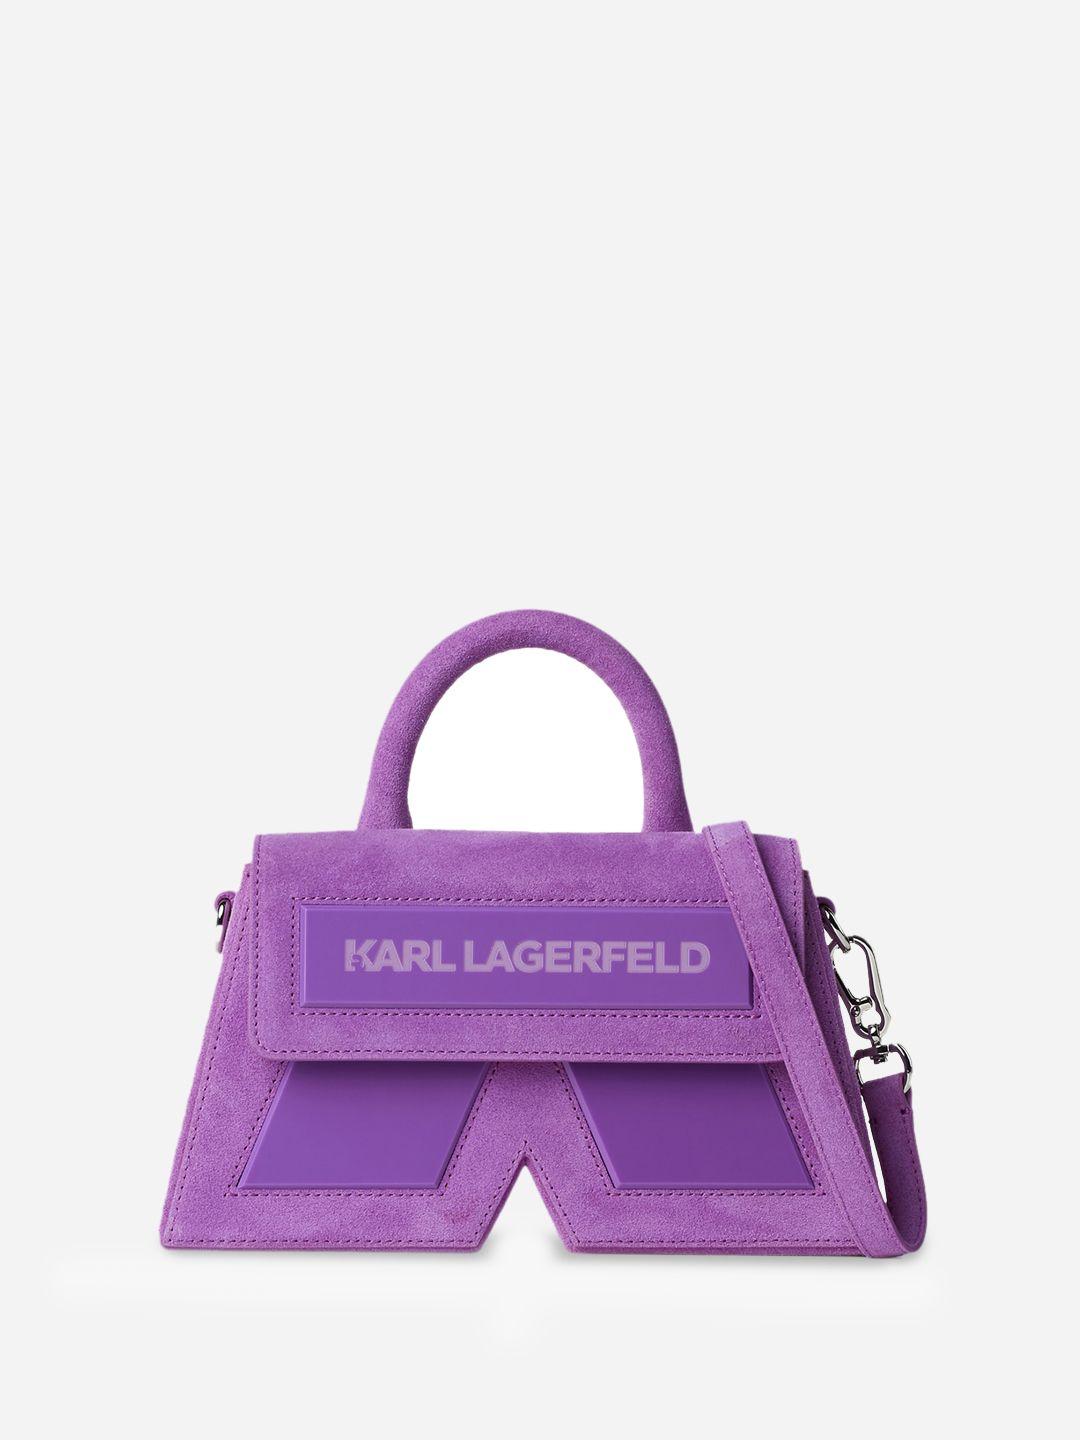 karl lagerfeld typography printed leather structured handheld bag